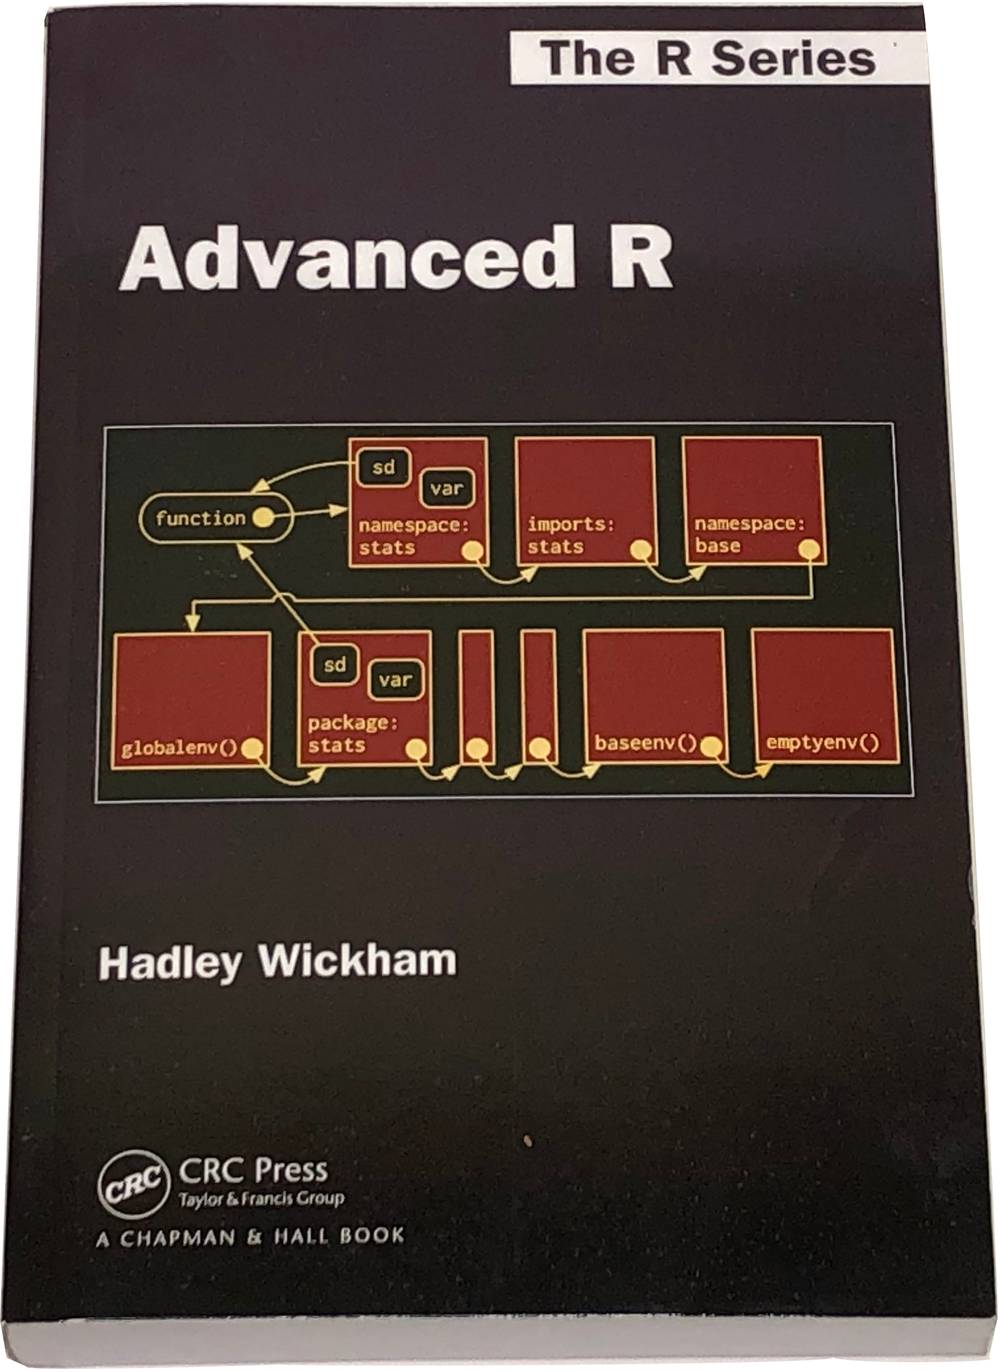 Book image of Advanced R.